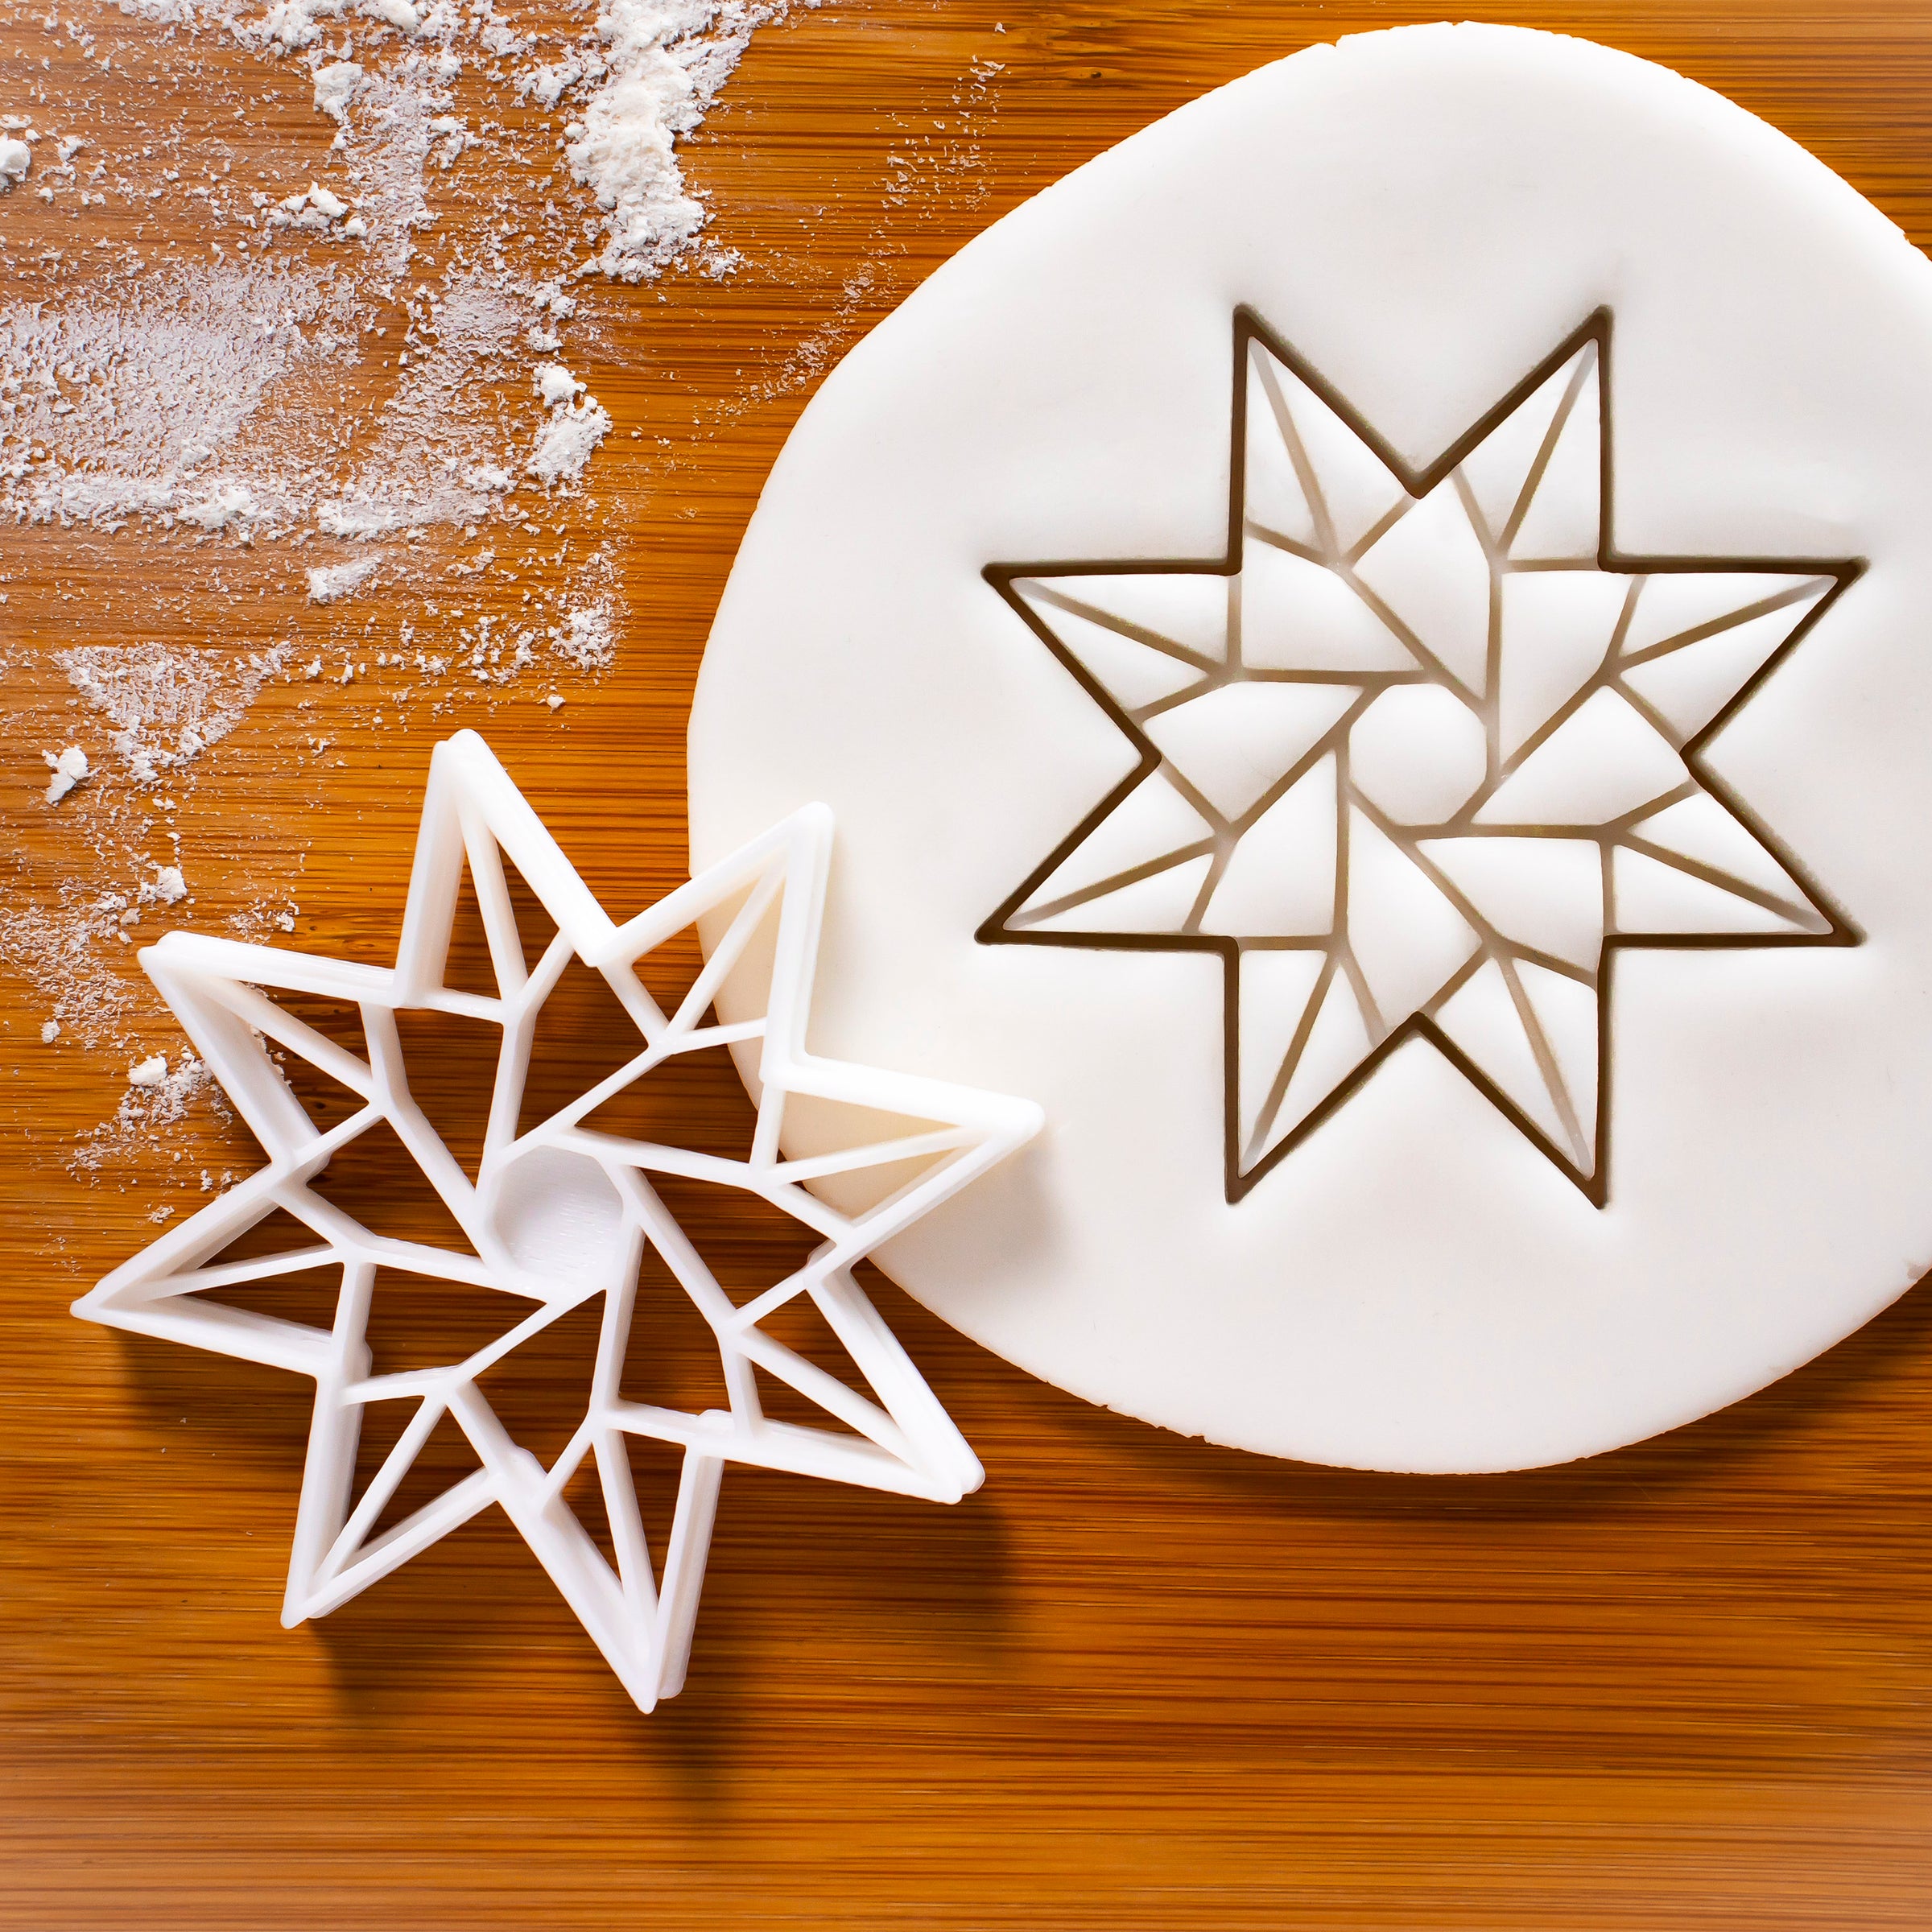 8 Sided Origami Star Cookie Cutter